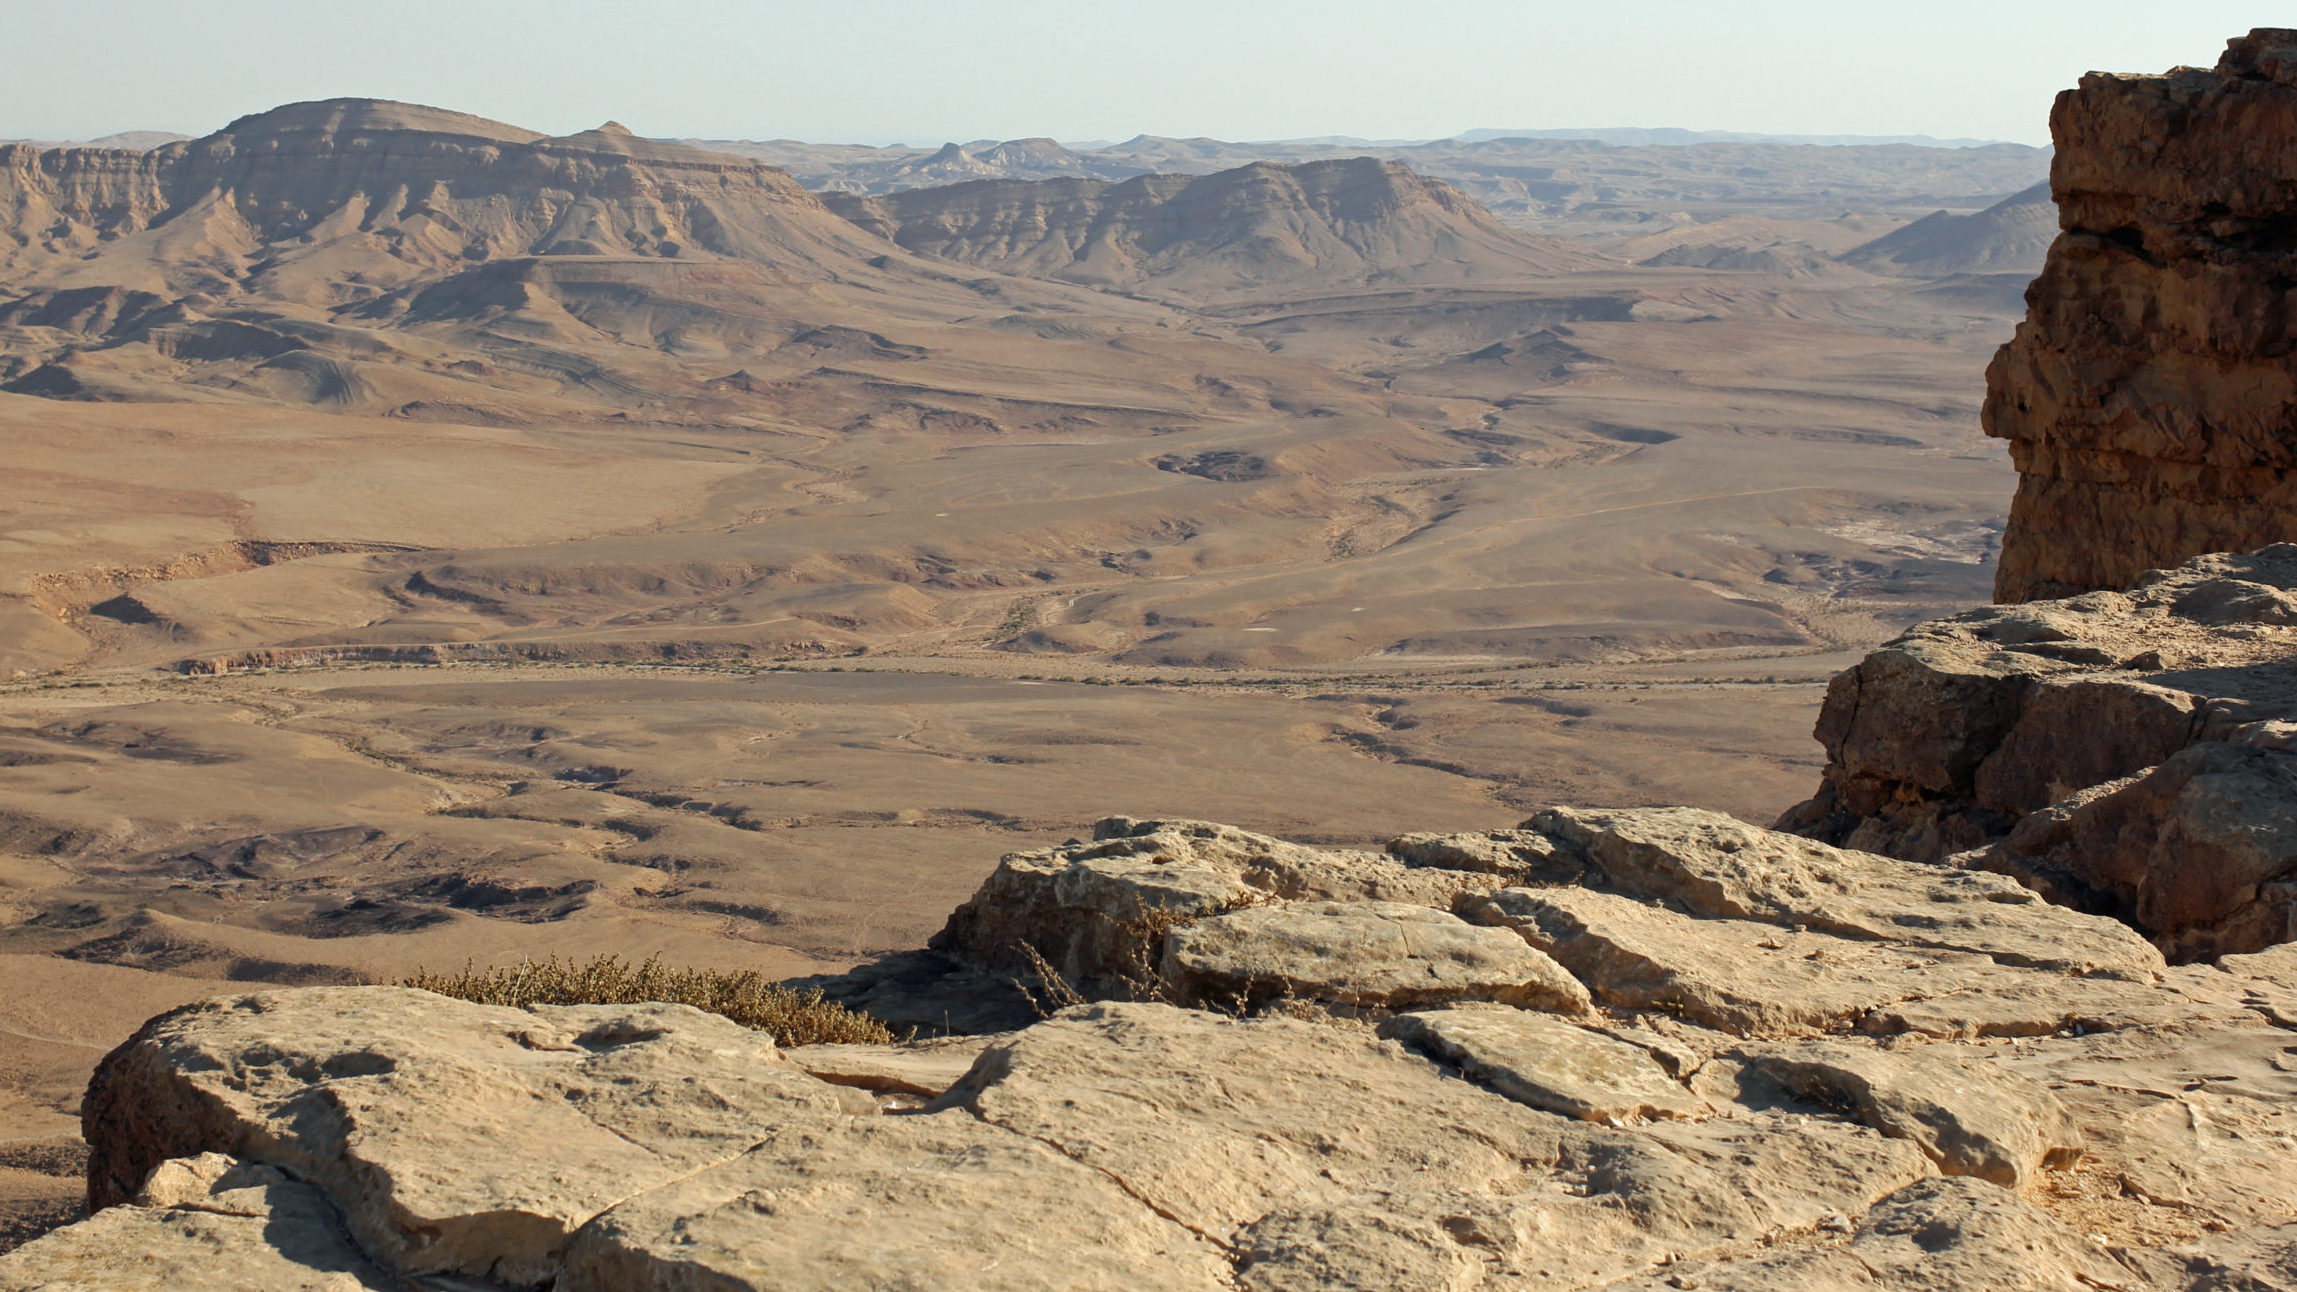 Parched Earth: Scientists Combat Desertification in Middle East (with VIDEO REPORT)